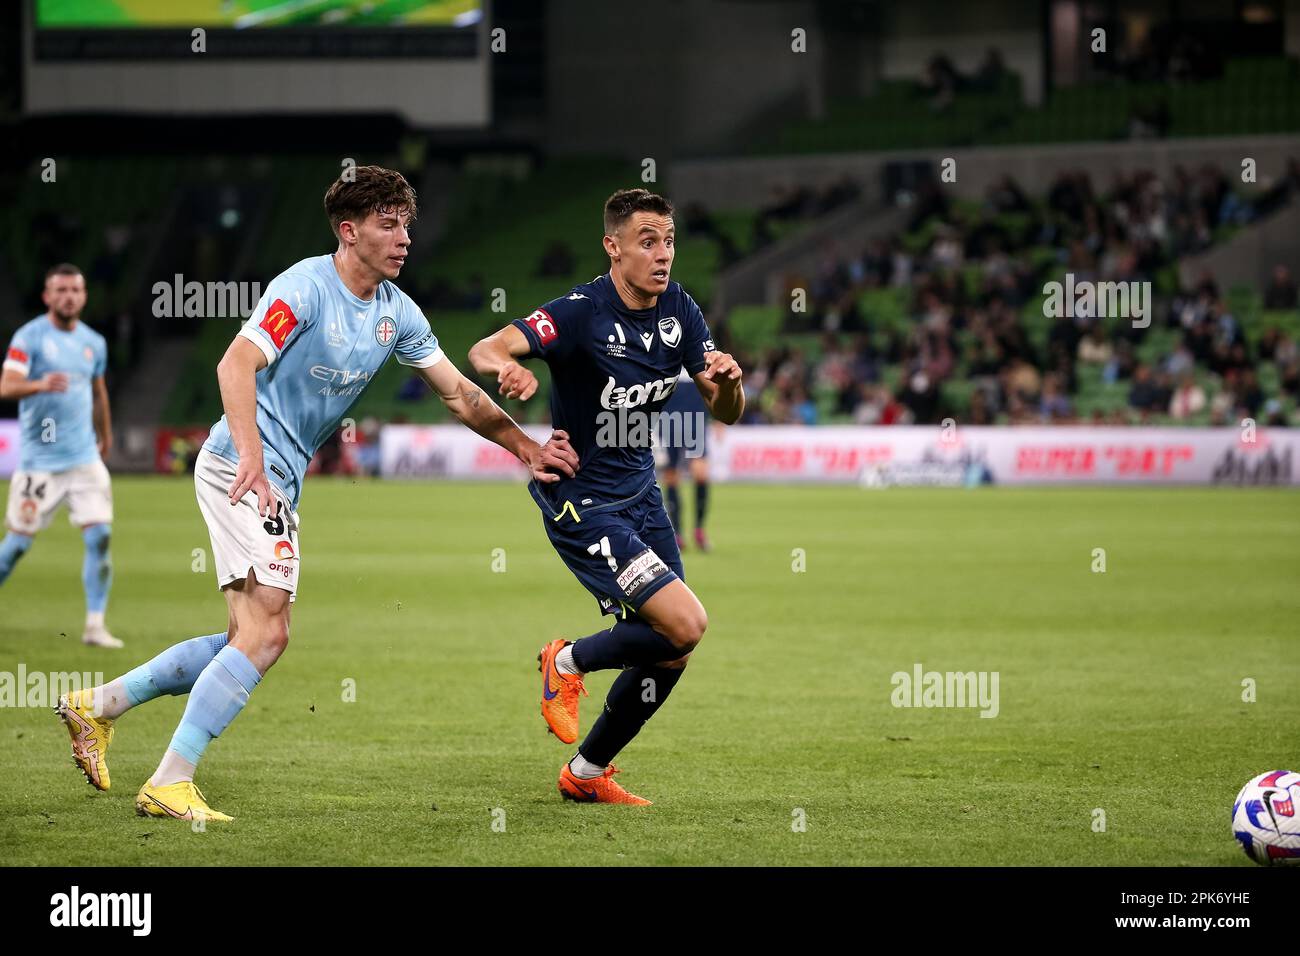 Melbourne, Australia, 5 April, 2023. Christopher Ikonomidis of Melbourne Victory controls the ball ahead of Jordan Bos of Melbourne City FC during the A-League soccer match between Melbourne City FC and Melbourne Victory at AAMI Park on April 5, 2023 in Melbourne, Australia. Credit: Dave Hewison/Speed Media/Alamy Live News Stock Photo